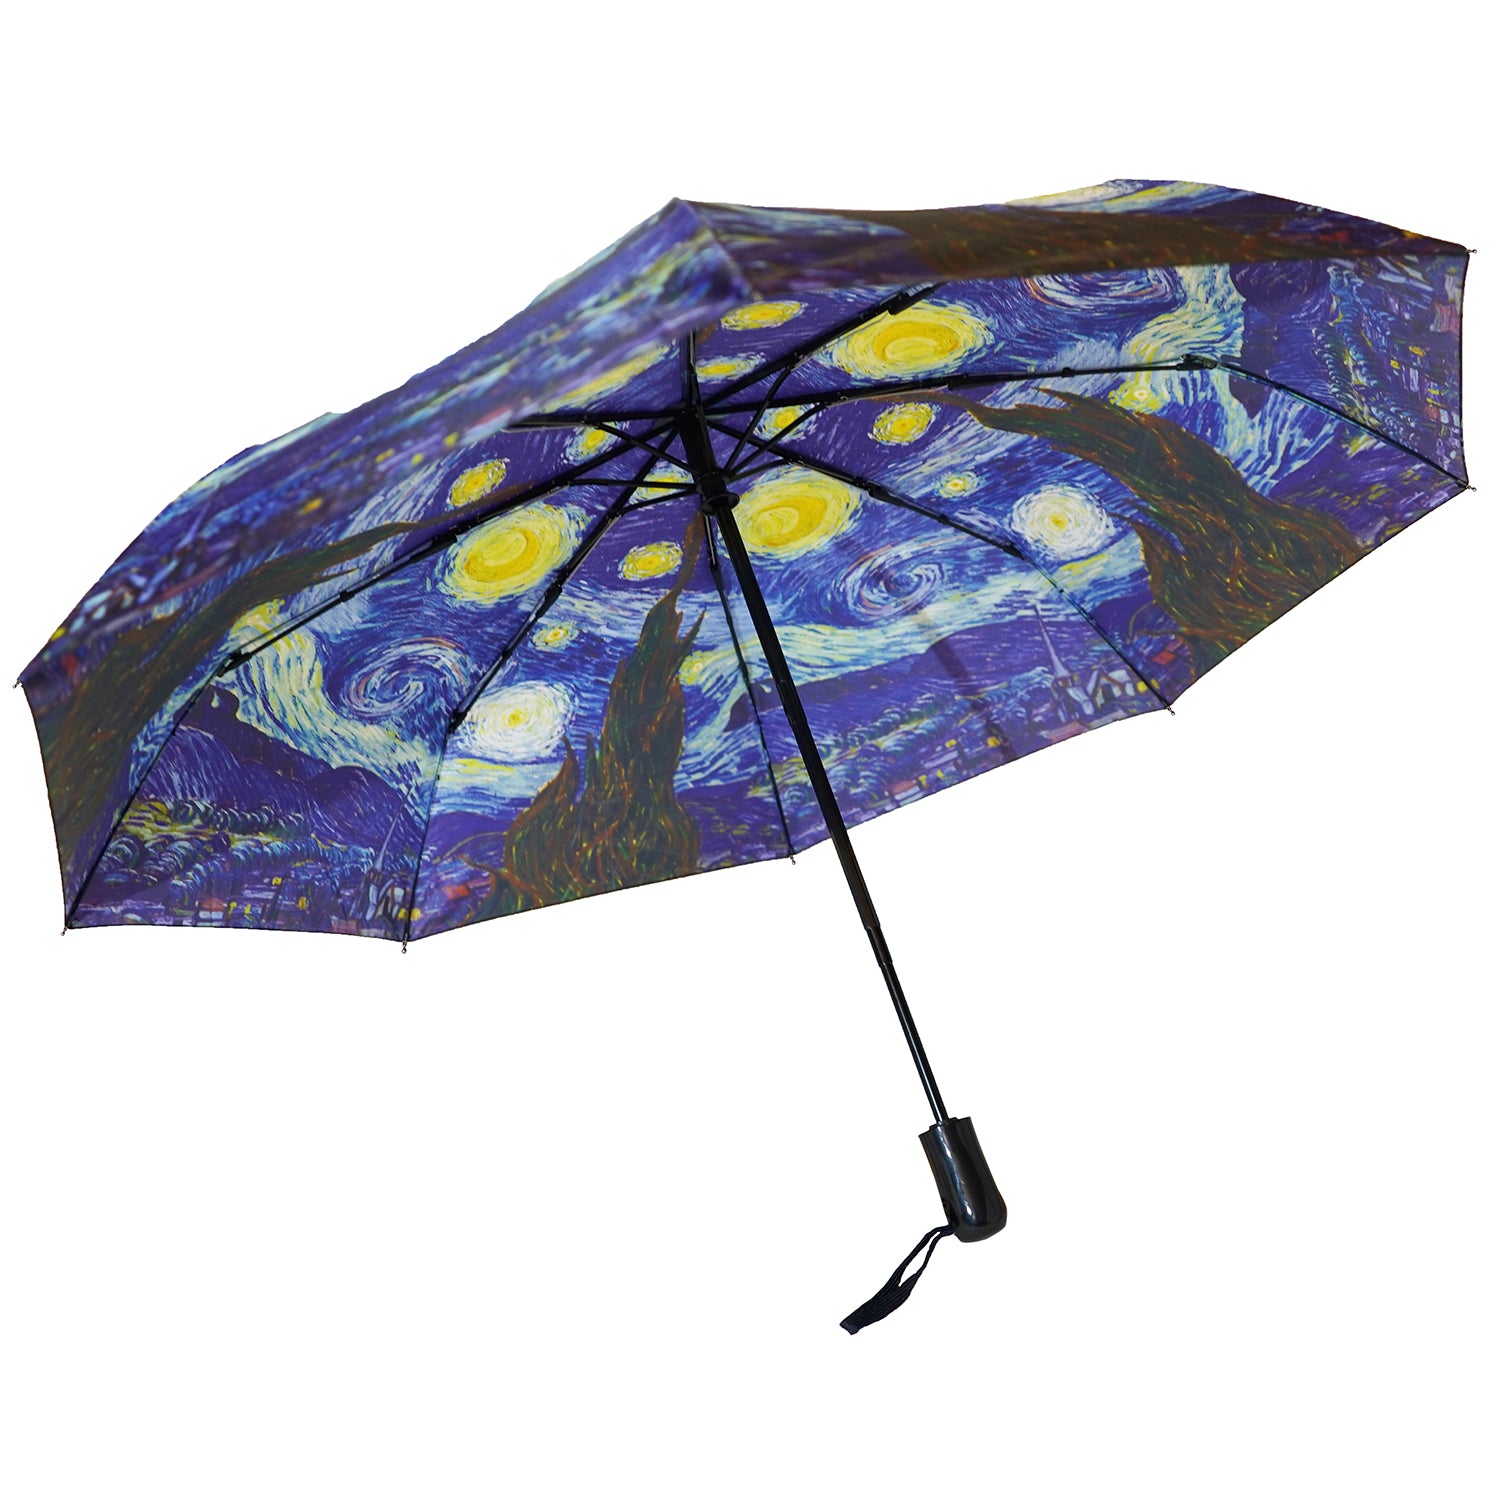 Vincent van Gogh's "Starry Night" Compact Collapsible Umbrella